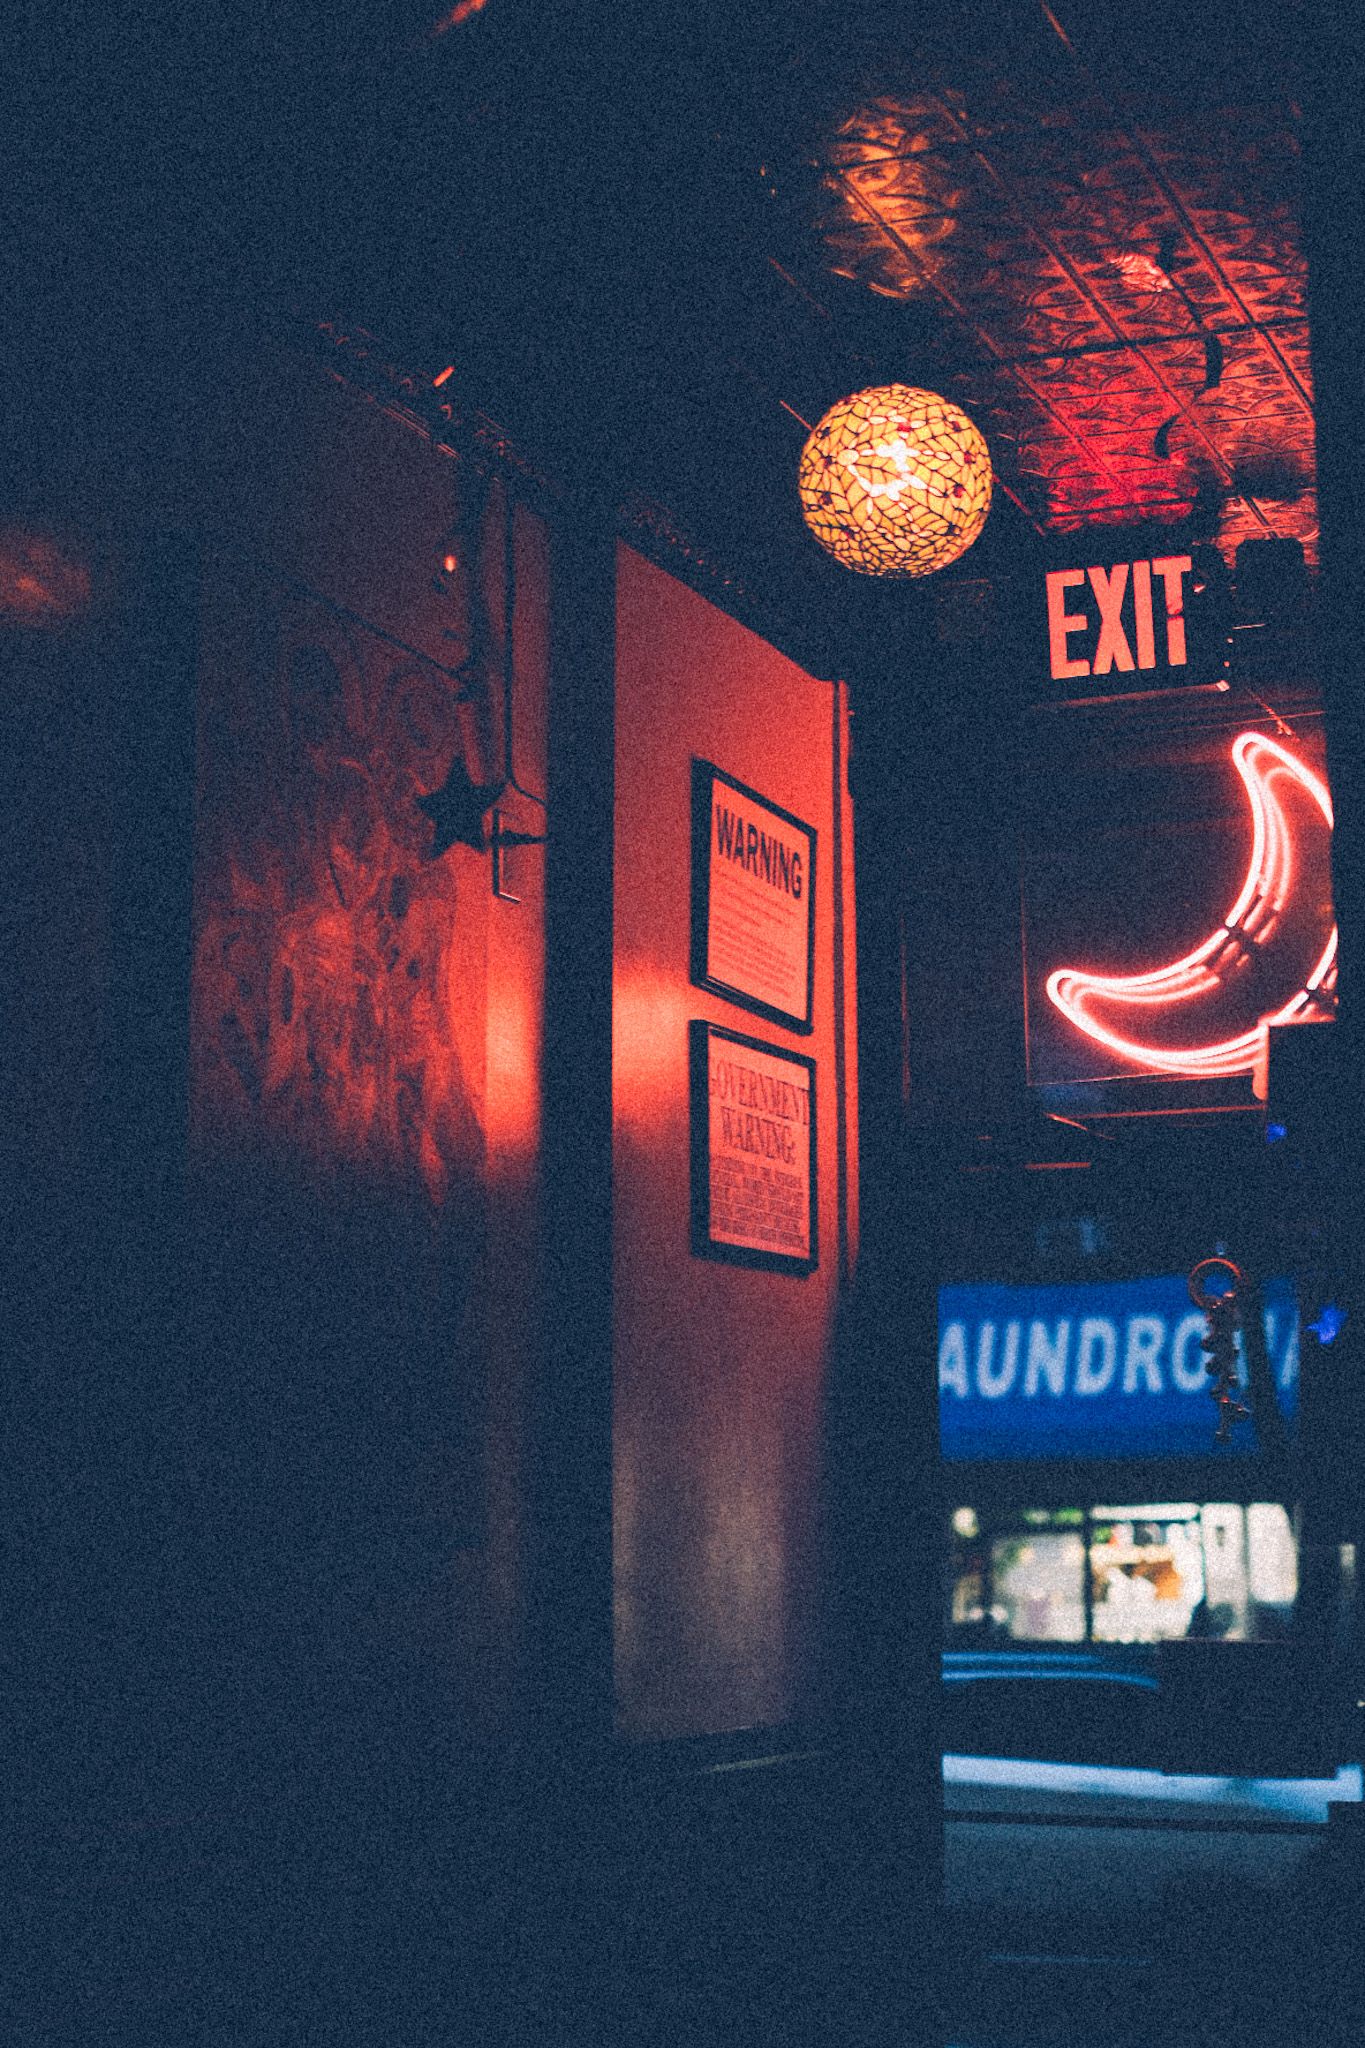 The doorway of a bar glows at night, lit by a red neon sign in the shape of a moon and an exit sign